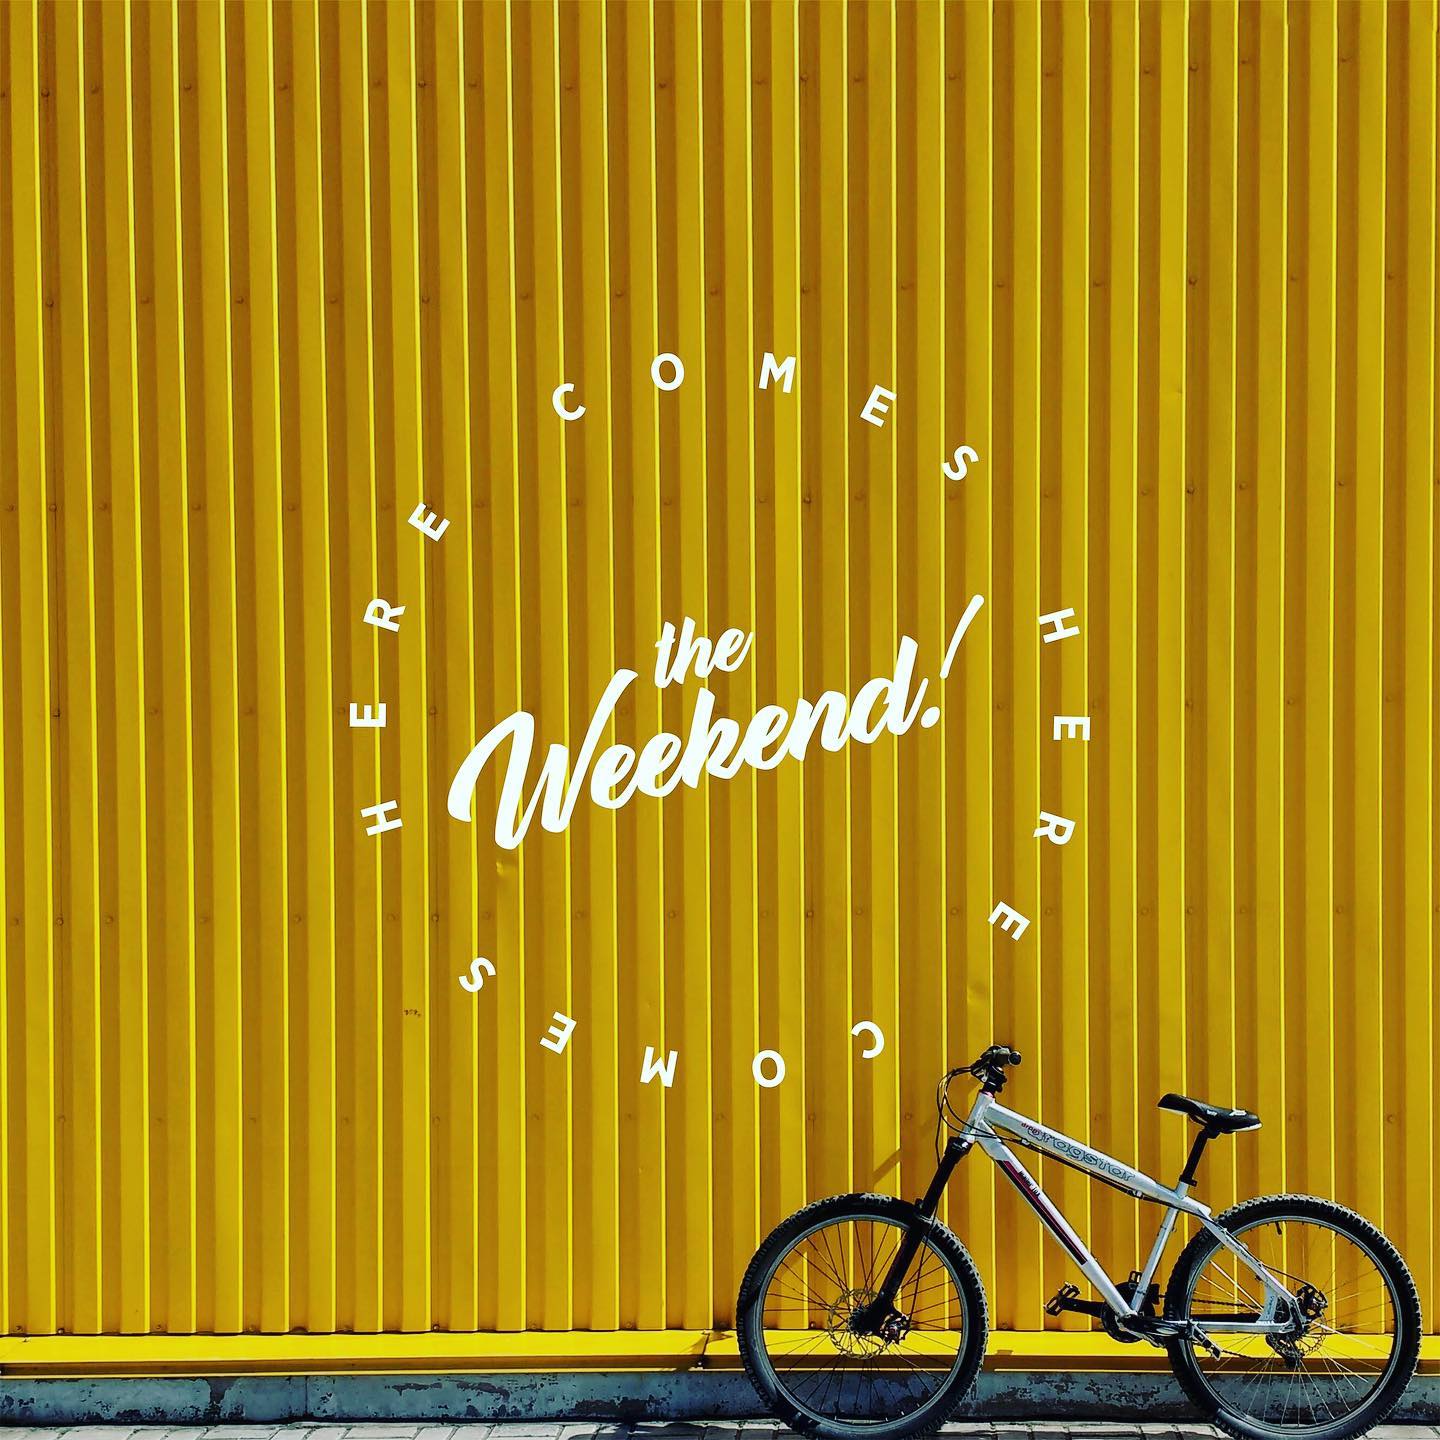 Enjoy your weekend! We look forward to seeing you on Sunday—we’ve got a great service planned!